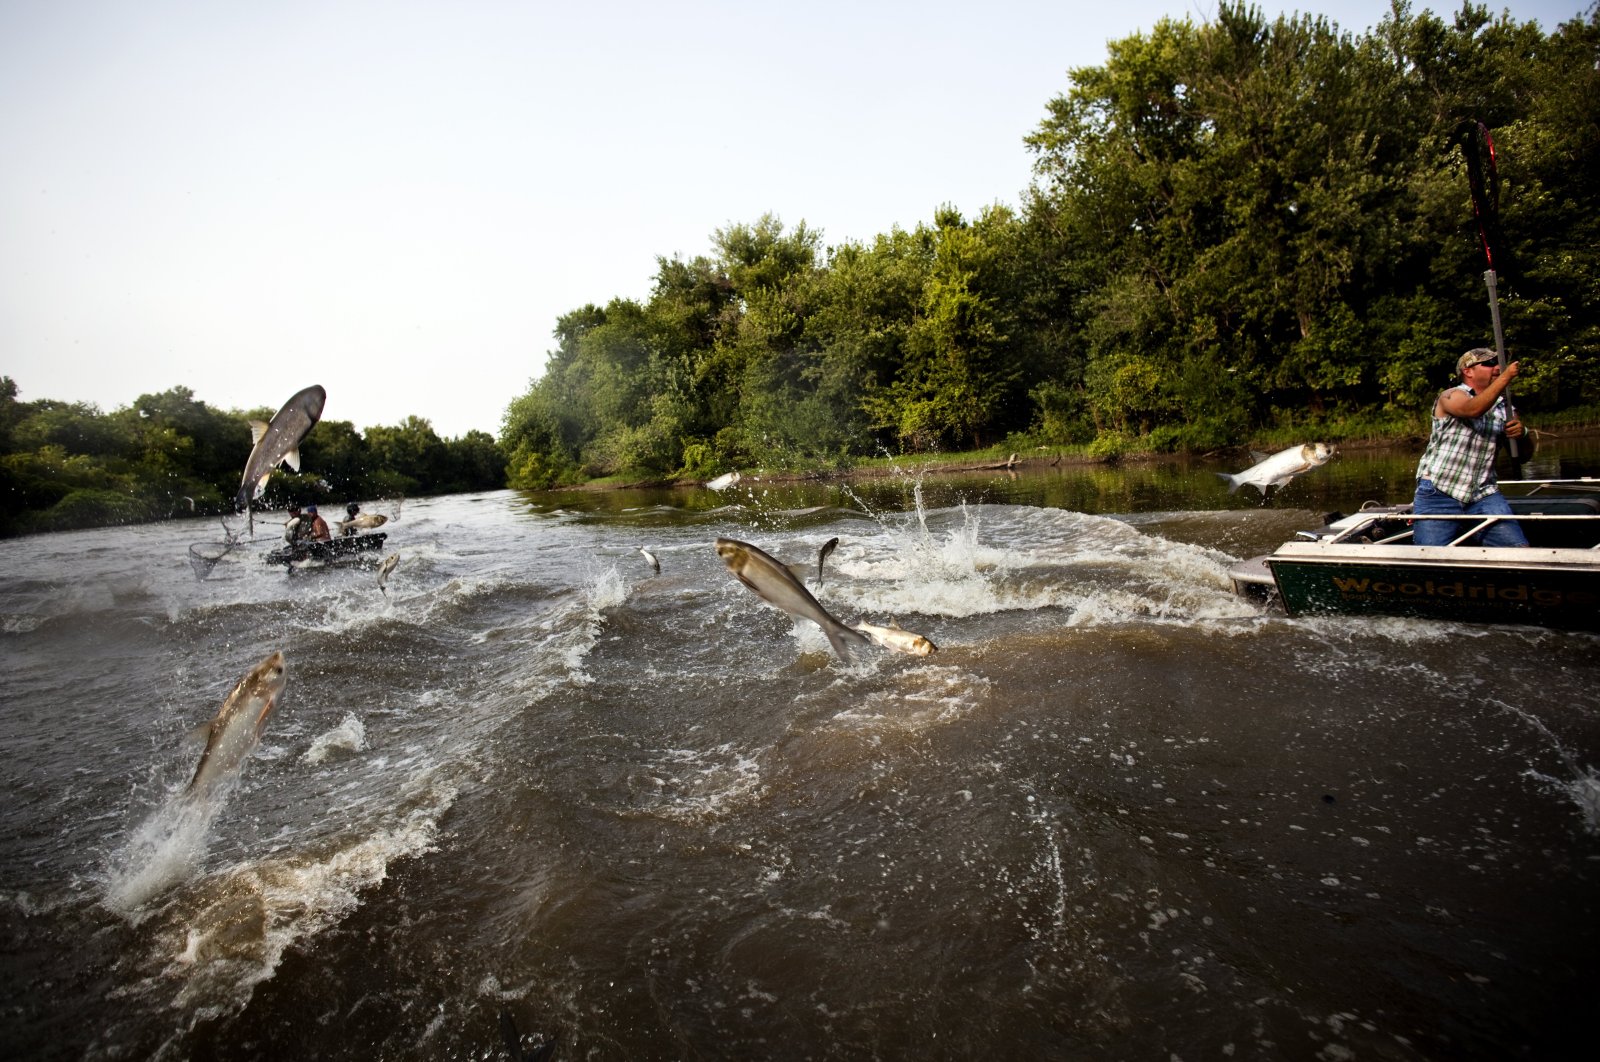 Contestants hang onto the side of their boats with nets extended, hoping to catch flying Asian Carp at the Redneck Fishing contest, Illinois, U.S., Aug. 7, 2010. (Getty Images Photo)